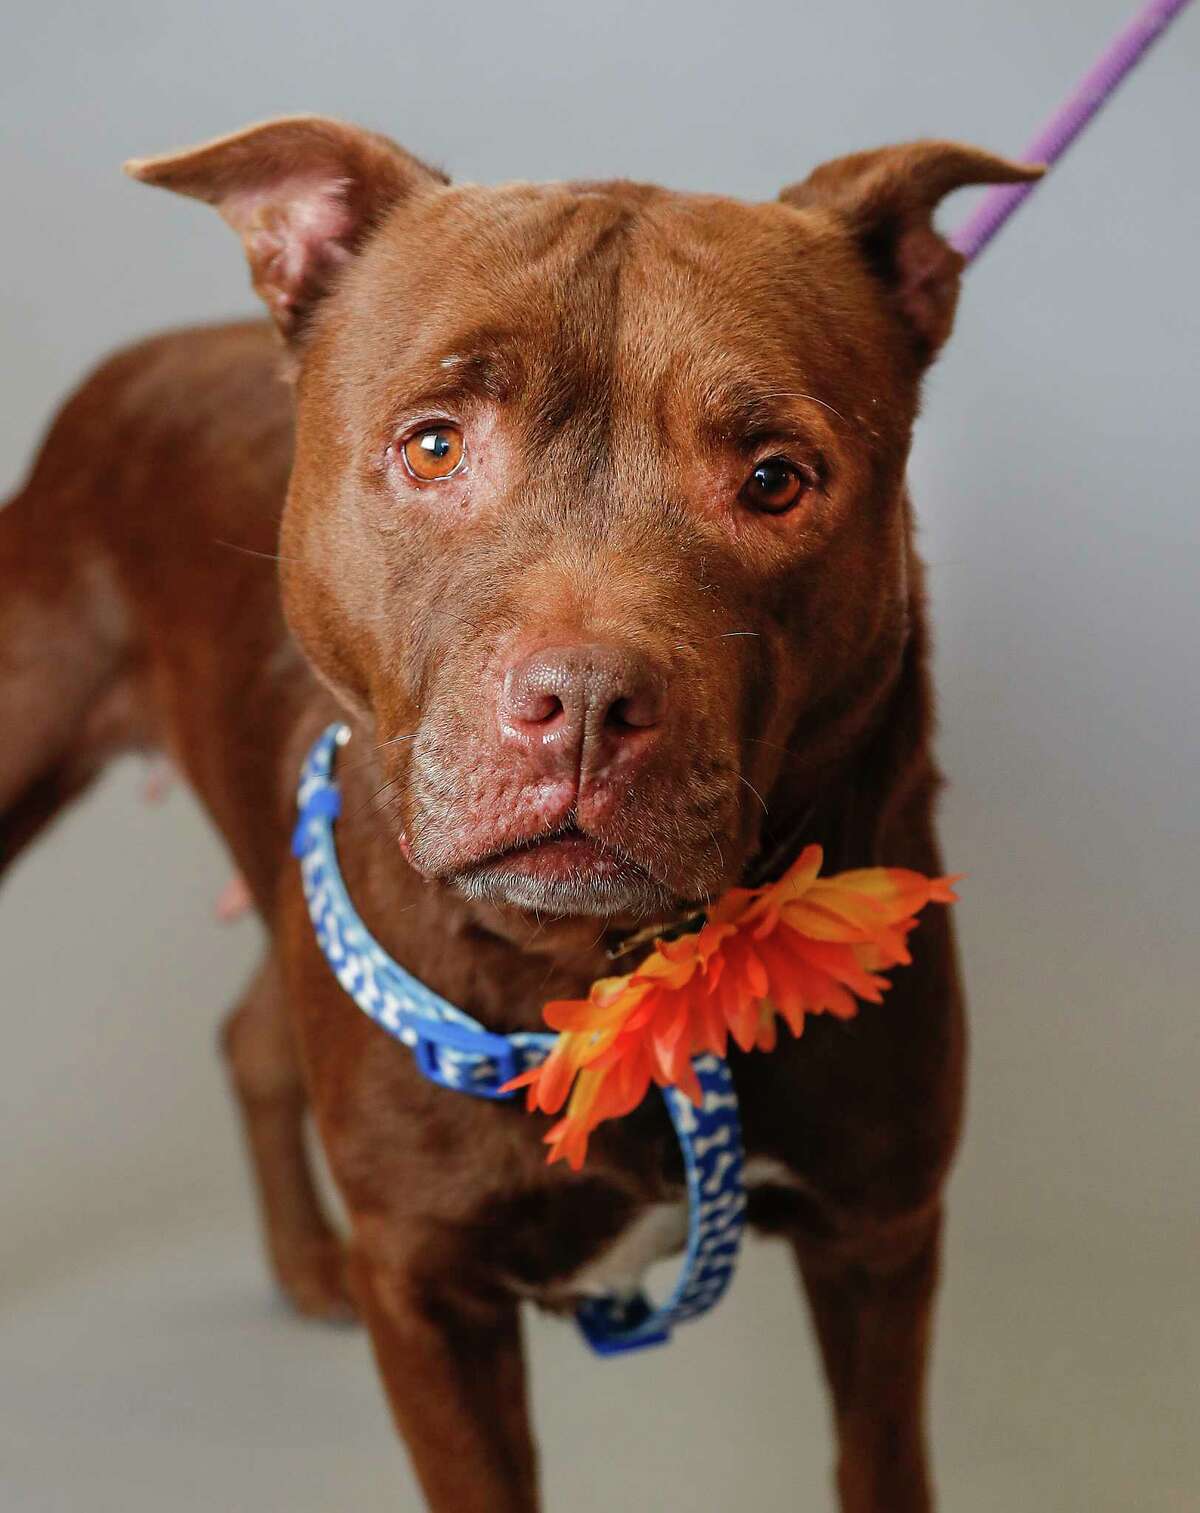 Pippy (A1667959) is a 4-year-old, female, red/white Staffordshire mix available for adoption from the BARC Animal Shelter, in Houston, Tuesday, Jan. 21, 2020. Pippy loves toys and playing. She makes the cutest noises when she "talks", and has plenty to say! She is personality plus!